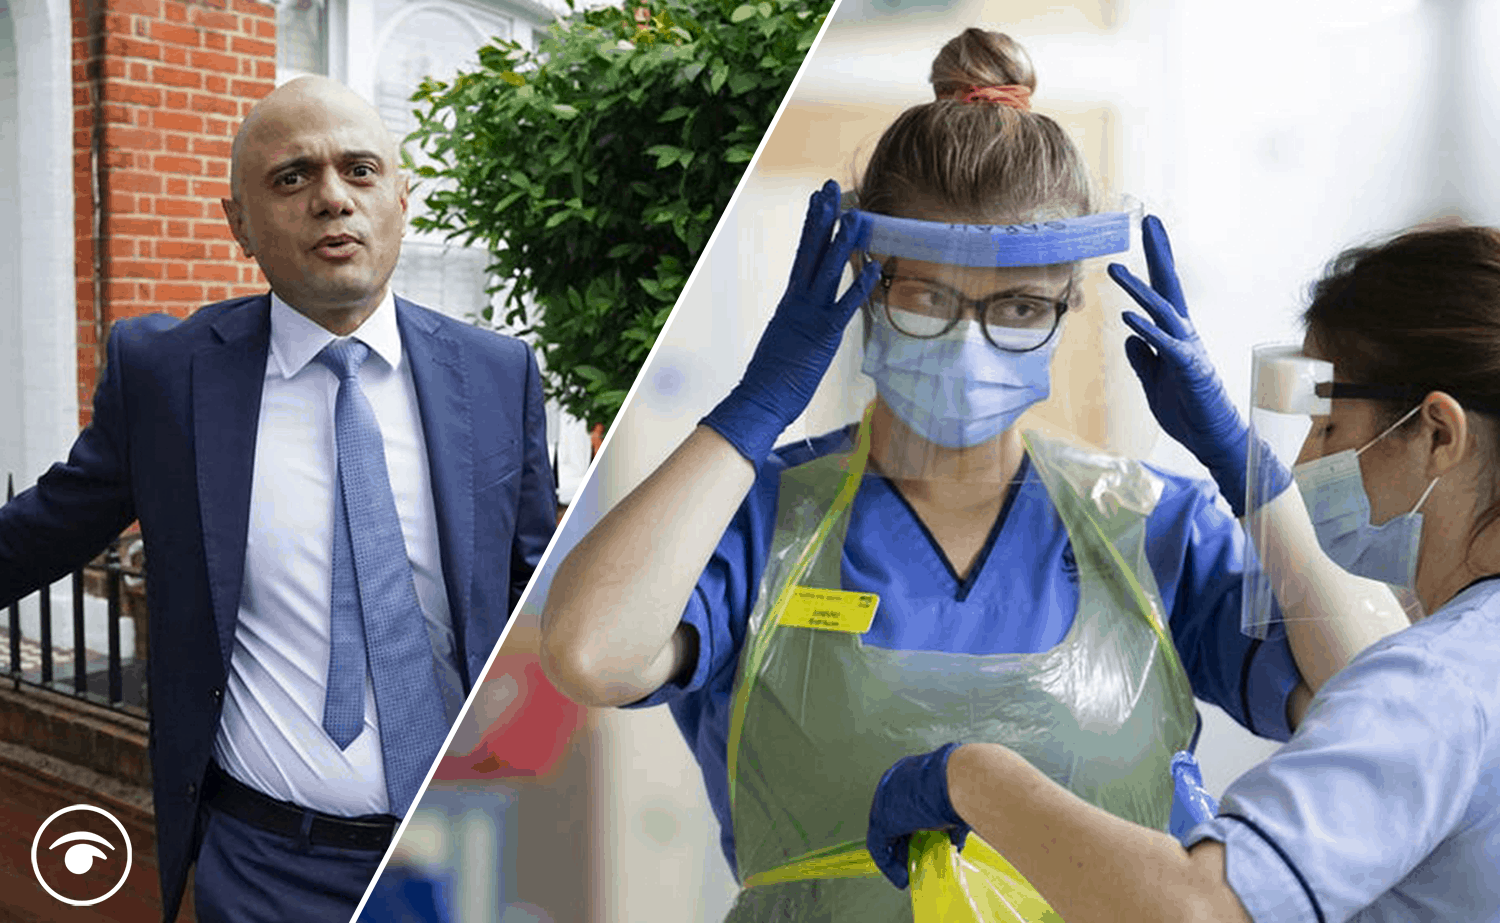 ‘Will we be paying?’ Javid grilled over ‘absurd’ NHS Netflix remarks